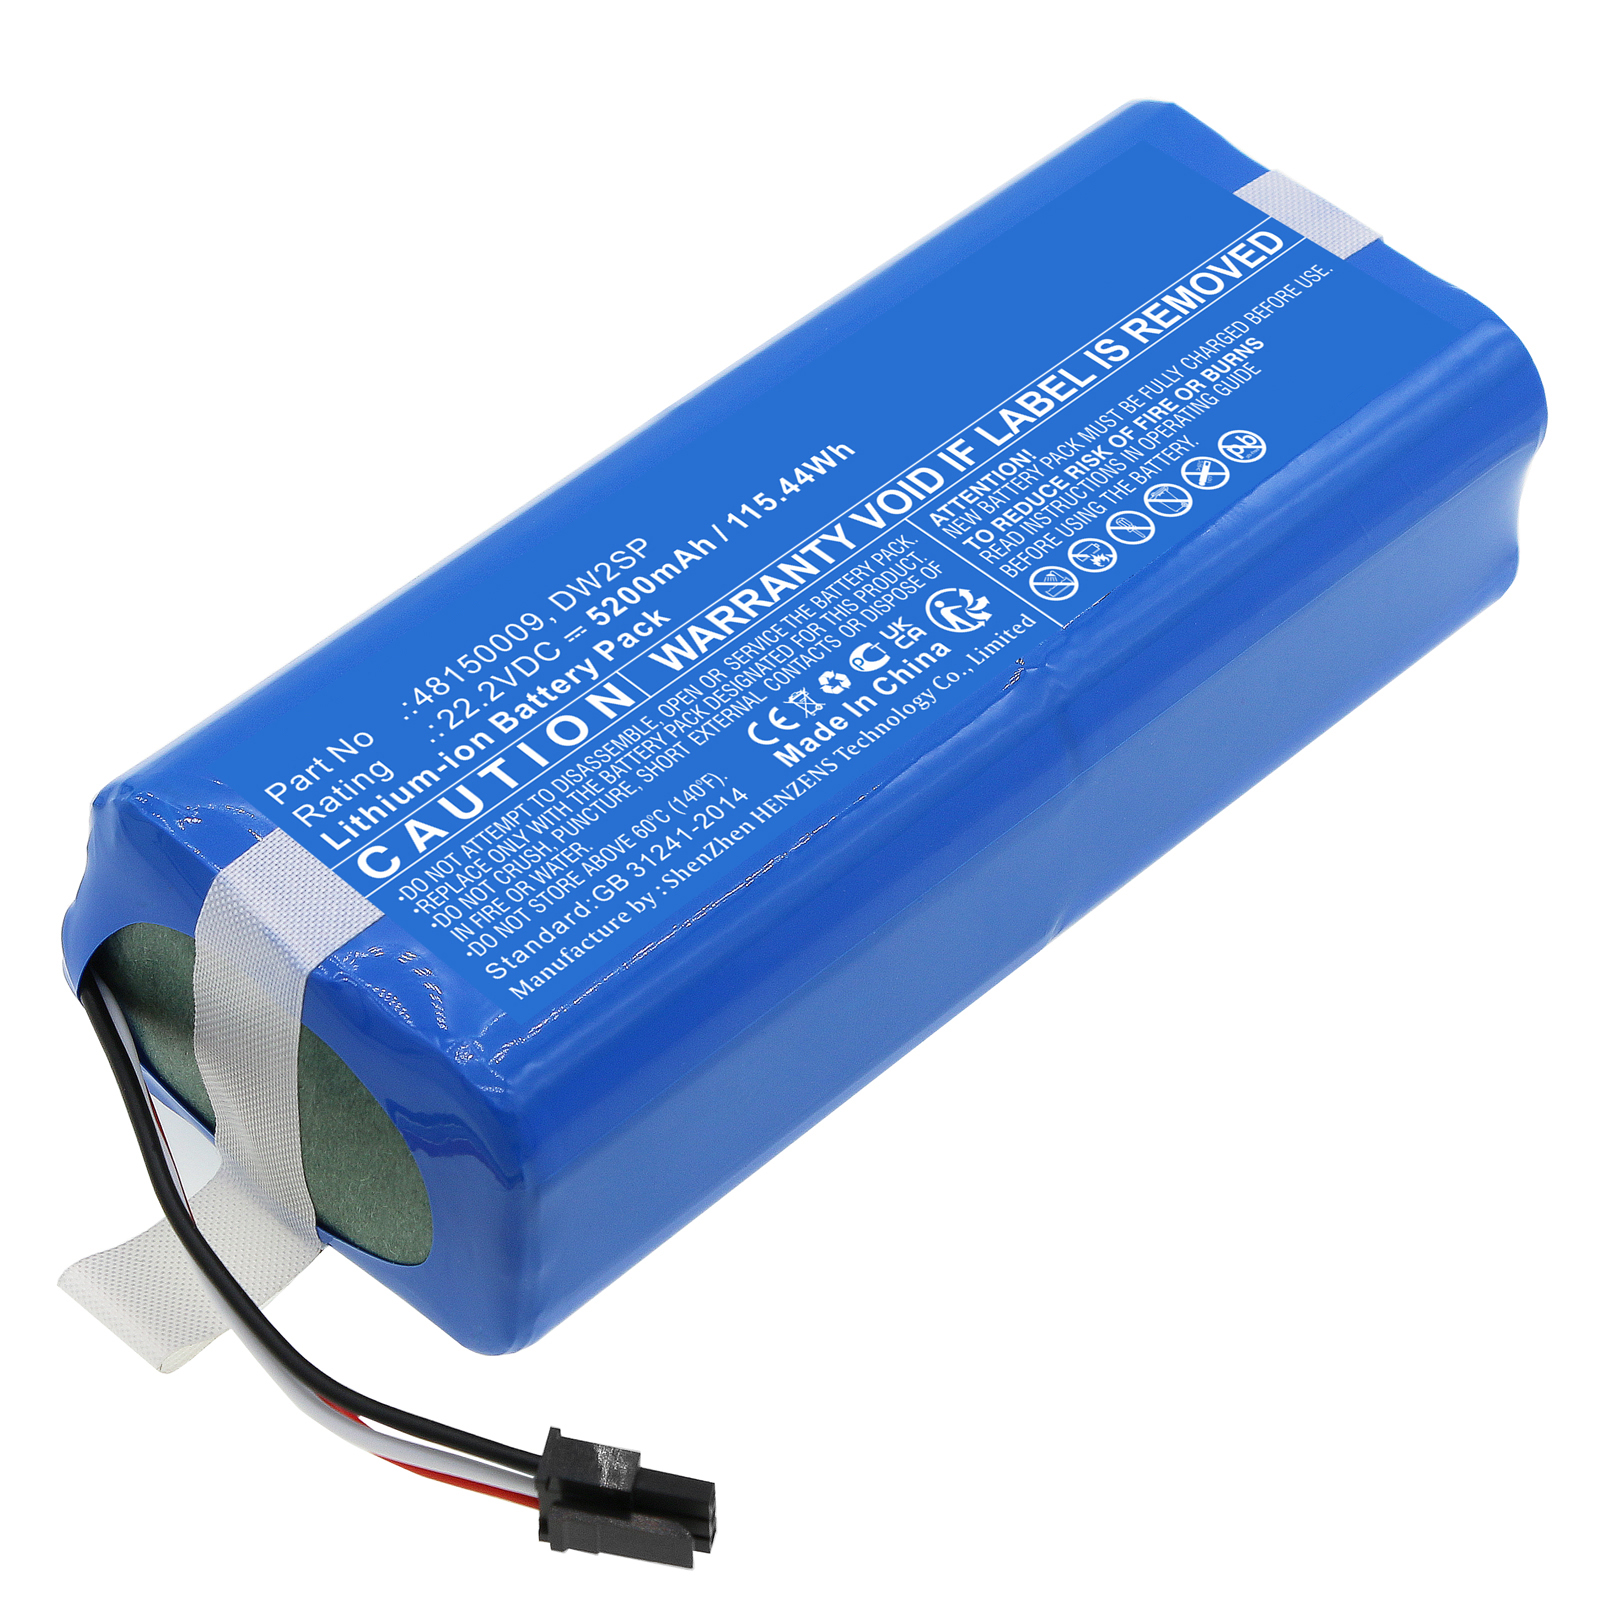 Synergy Digital Lawn Mower Battery, Compatible with Lawn Expert DW2SP Lawn Mower Battery (Li-ion, 22.2V, 5200mAh)